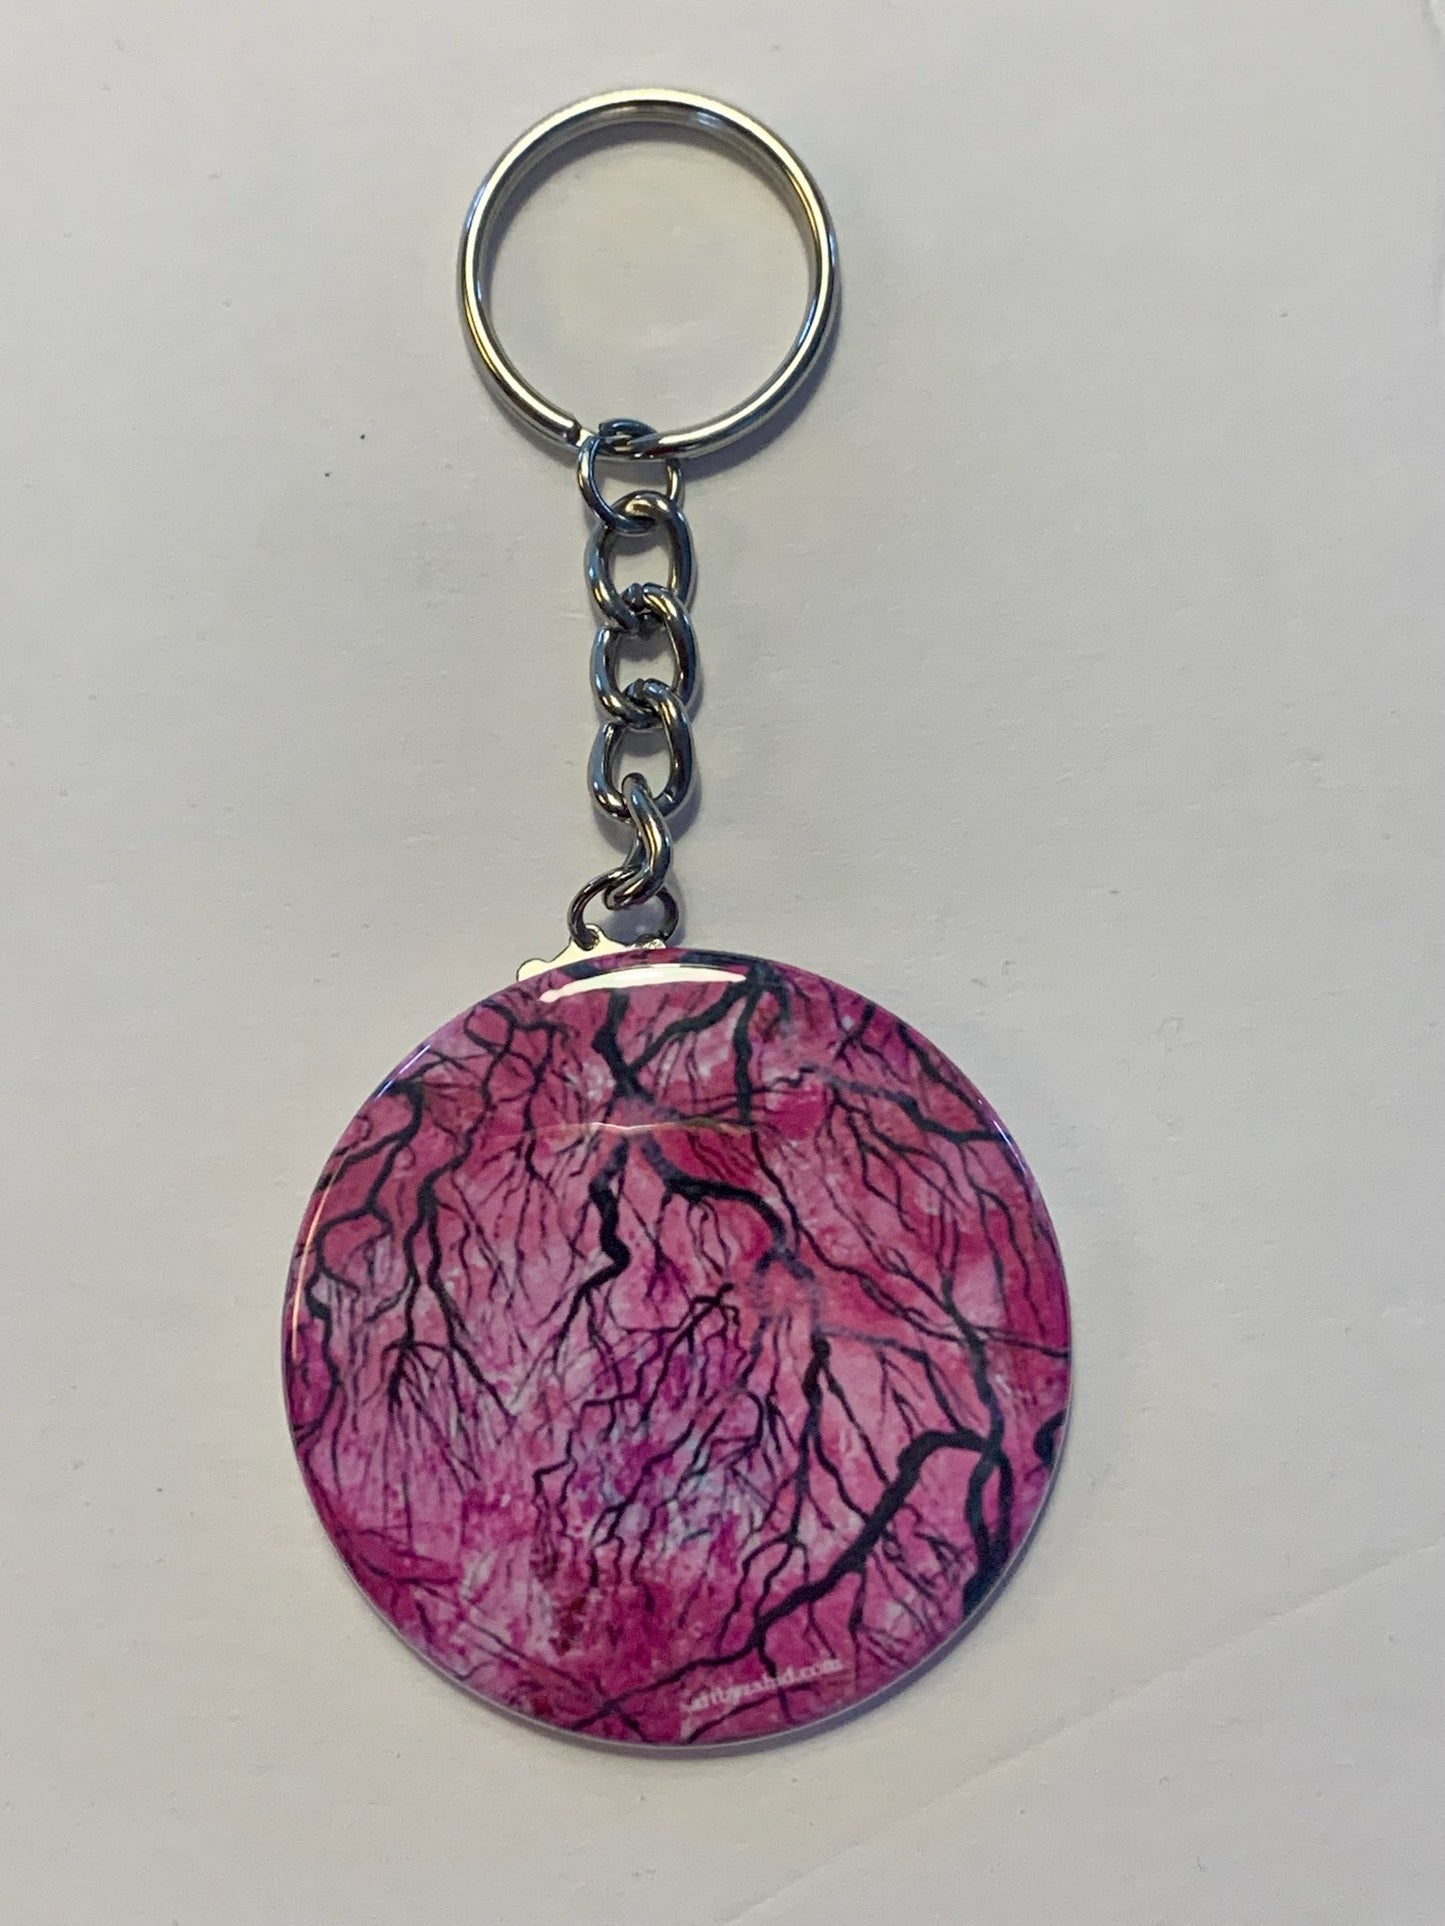 Morning with Cherry Blossoms - 2" Keychain